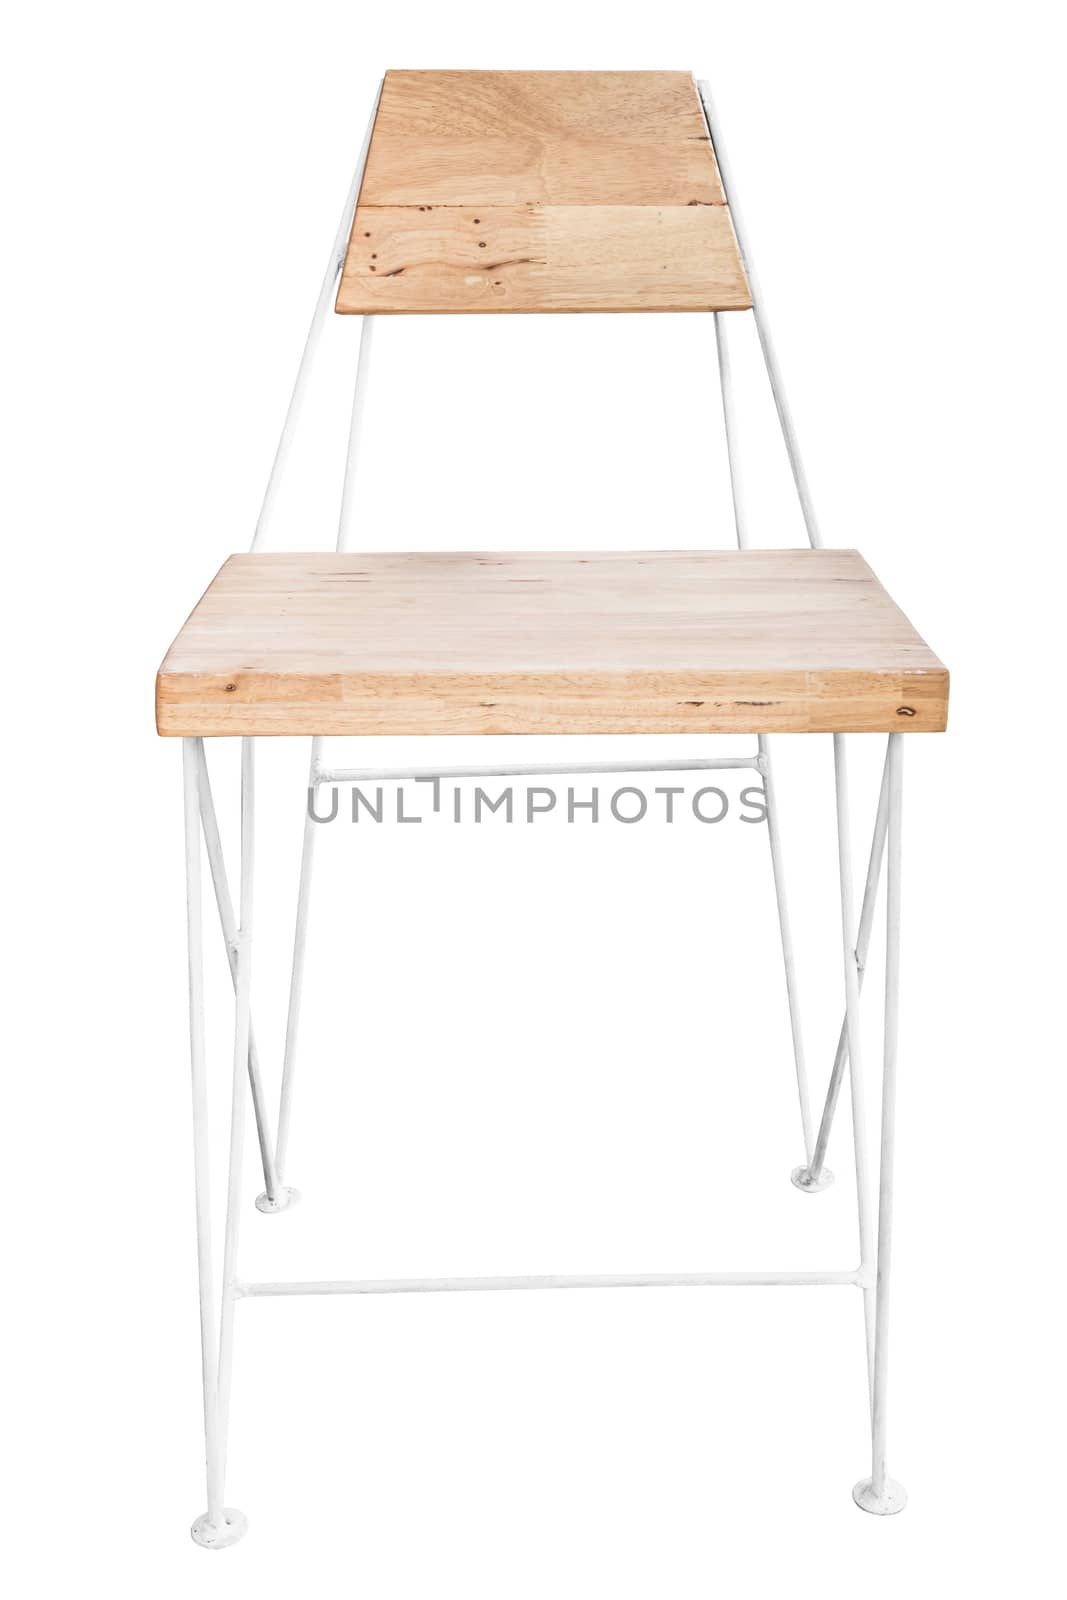 Wooden chair with steel legs simplistic on white background, work with path.